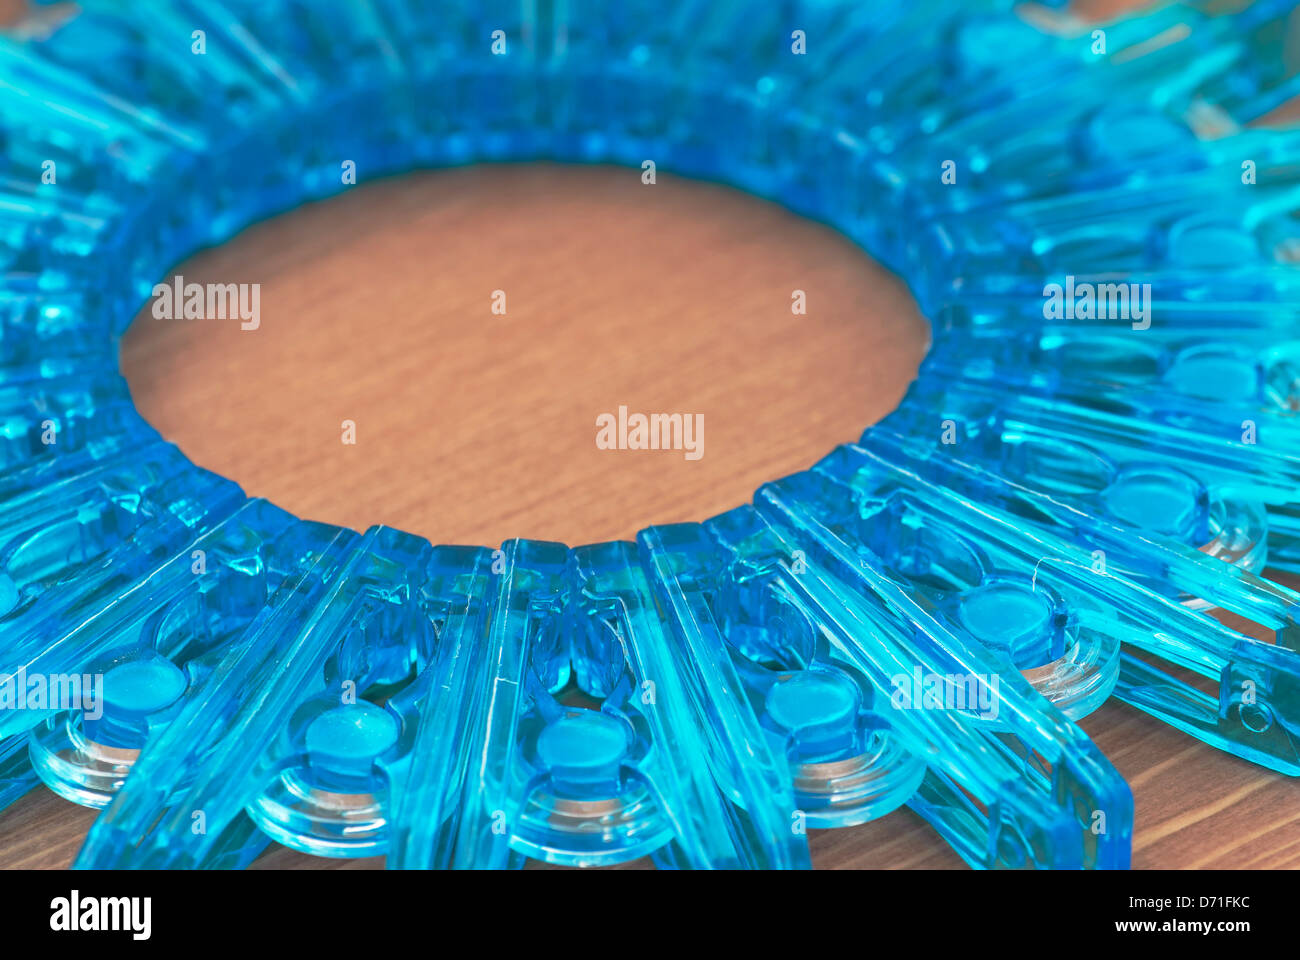 Clothes pegs in the form of a circle. Stock Photo